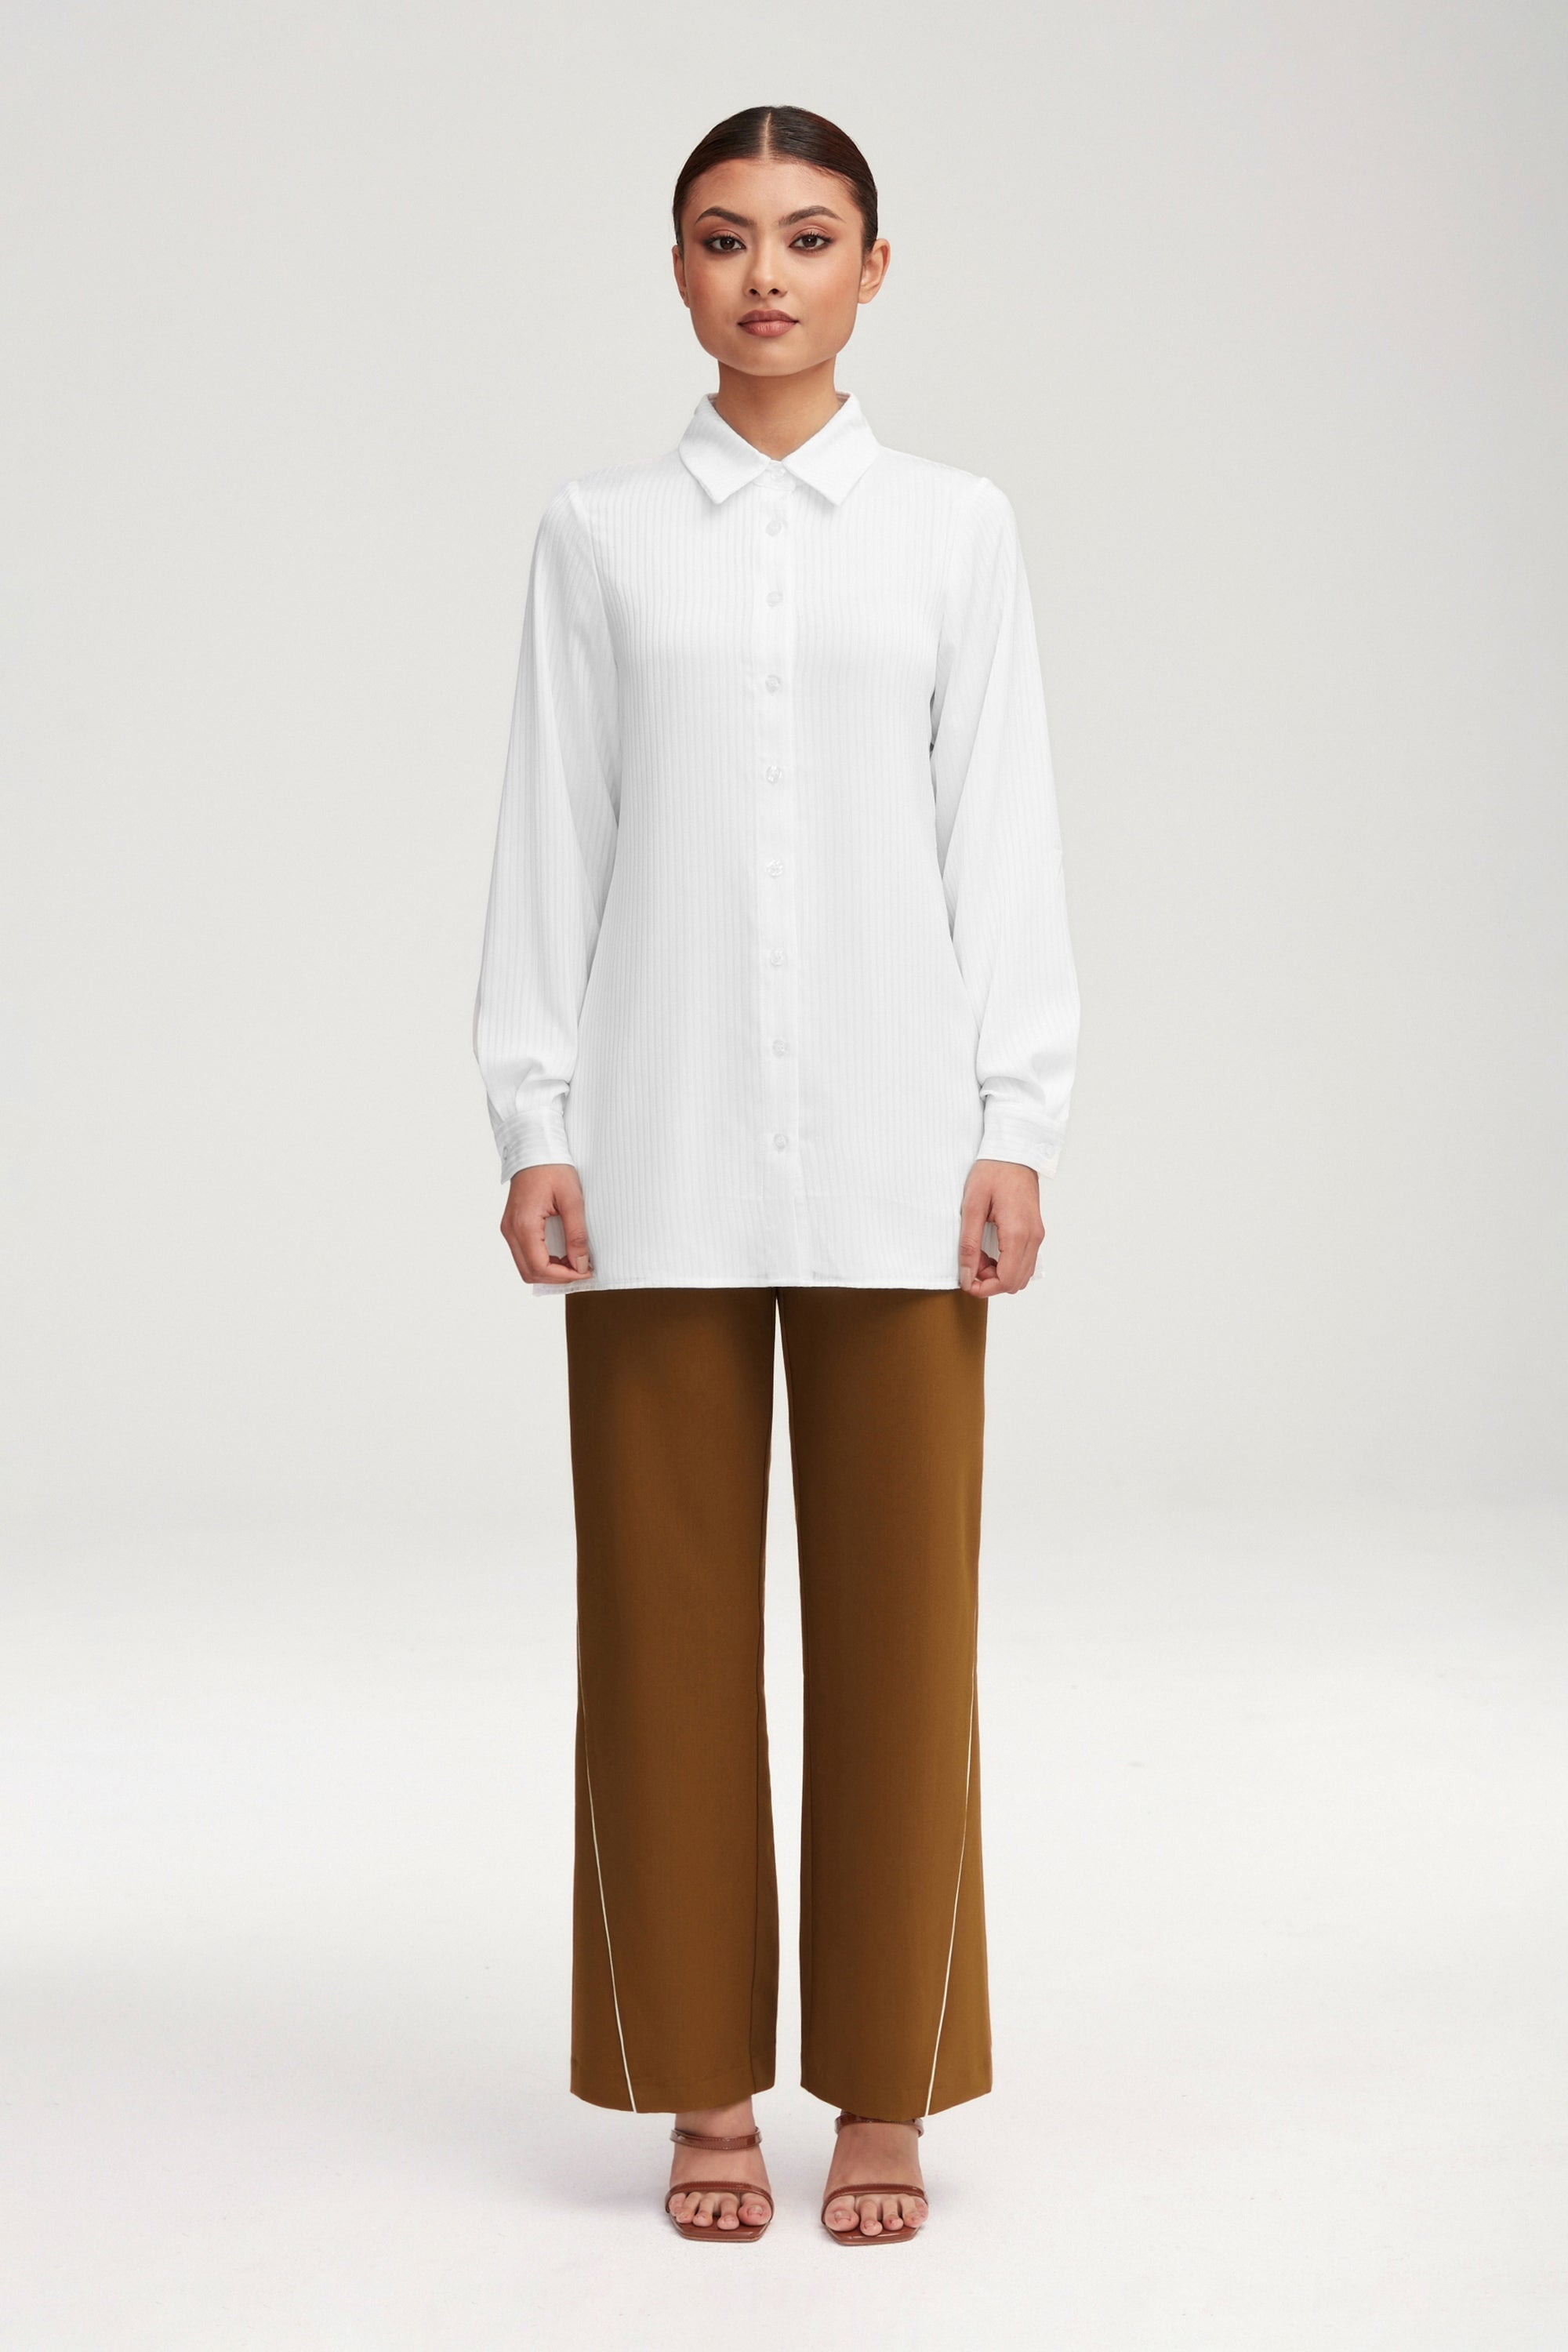 Jaserah Button Down Top - White Clothing epschoolboard 